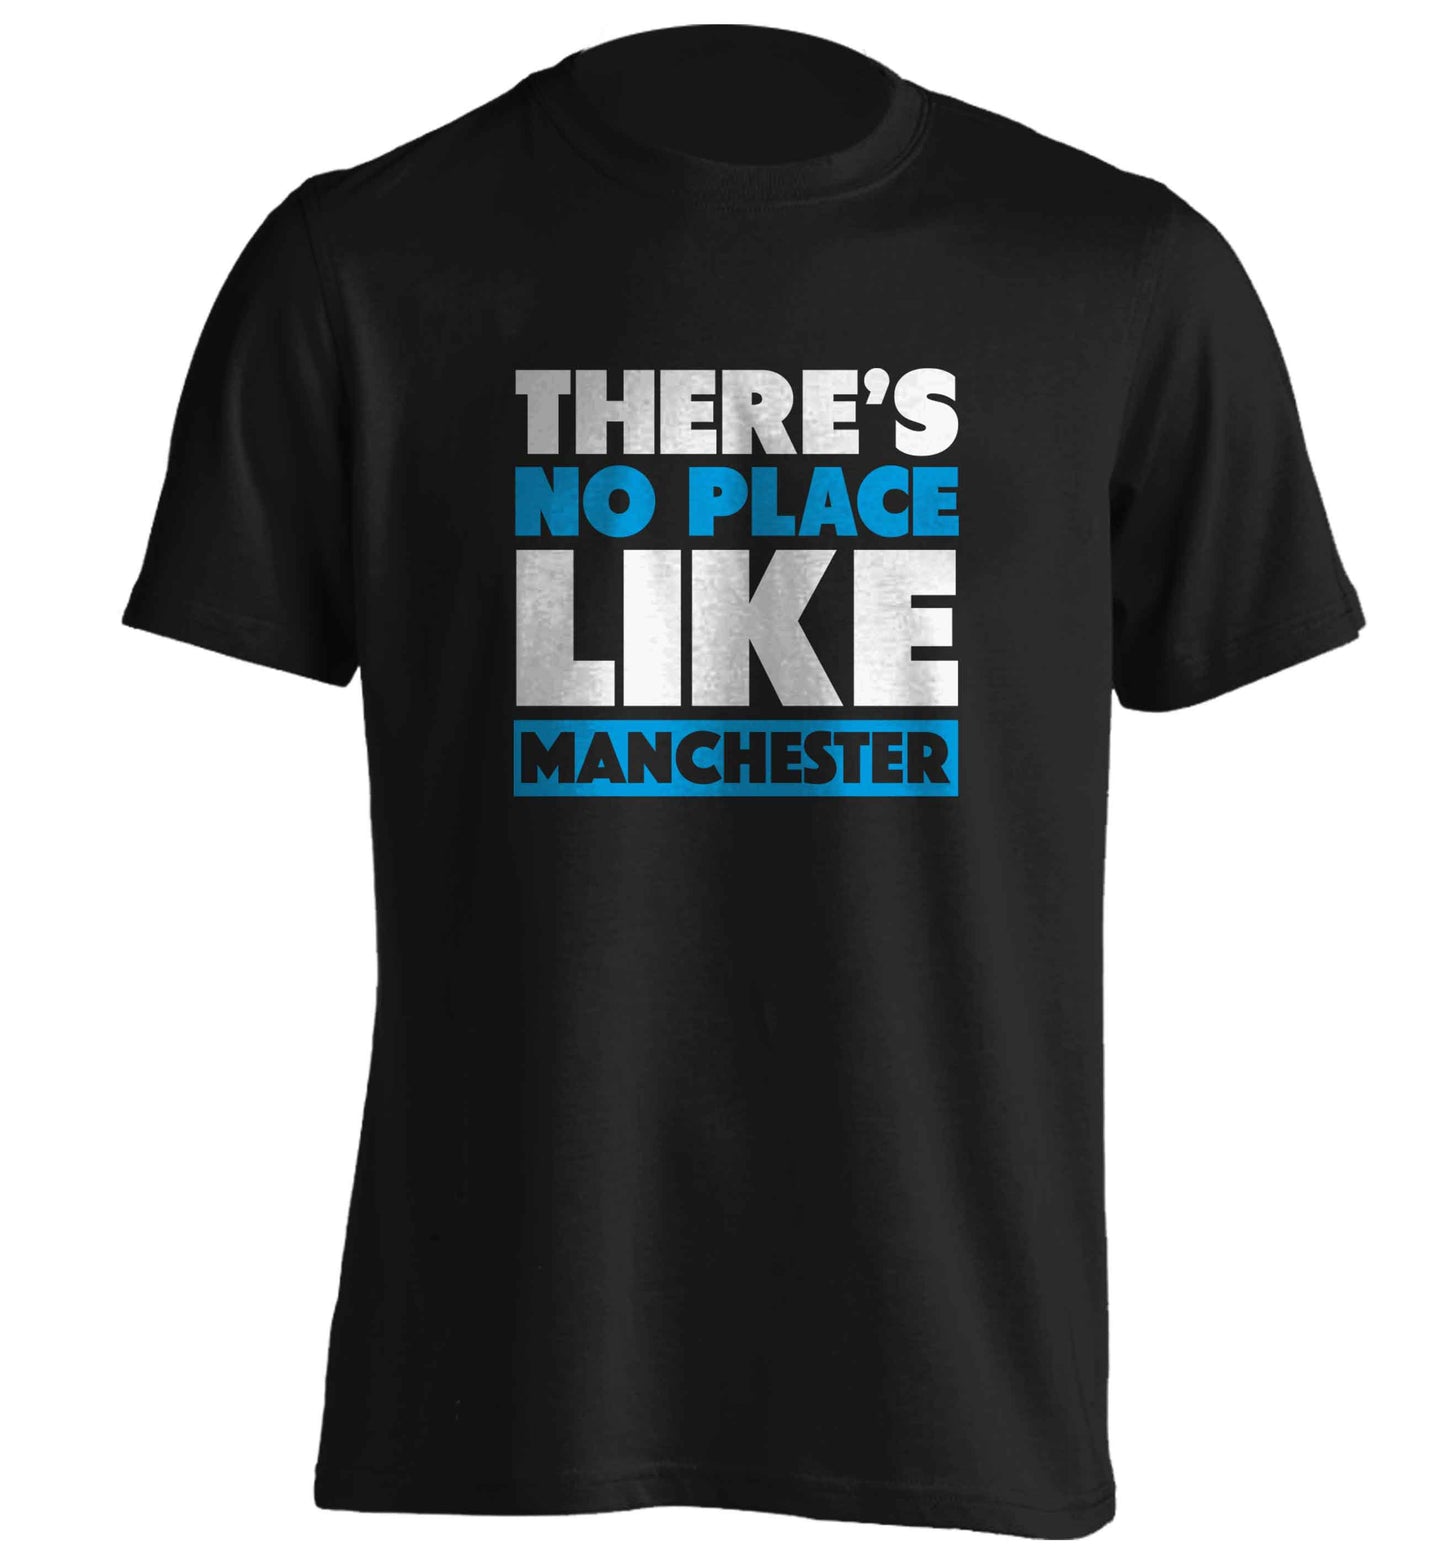 There's no place like Manchester adults unisex black Tshirt 2XL